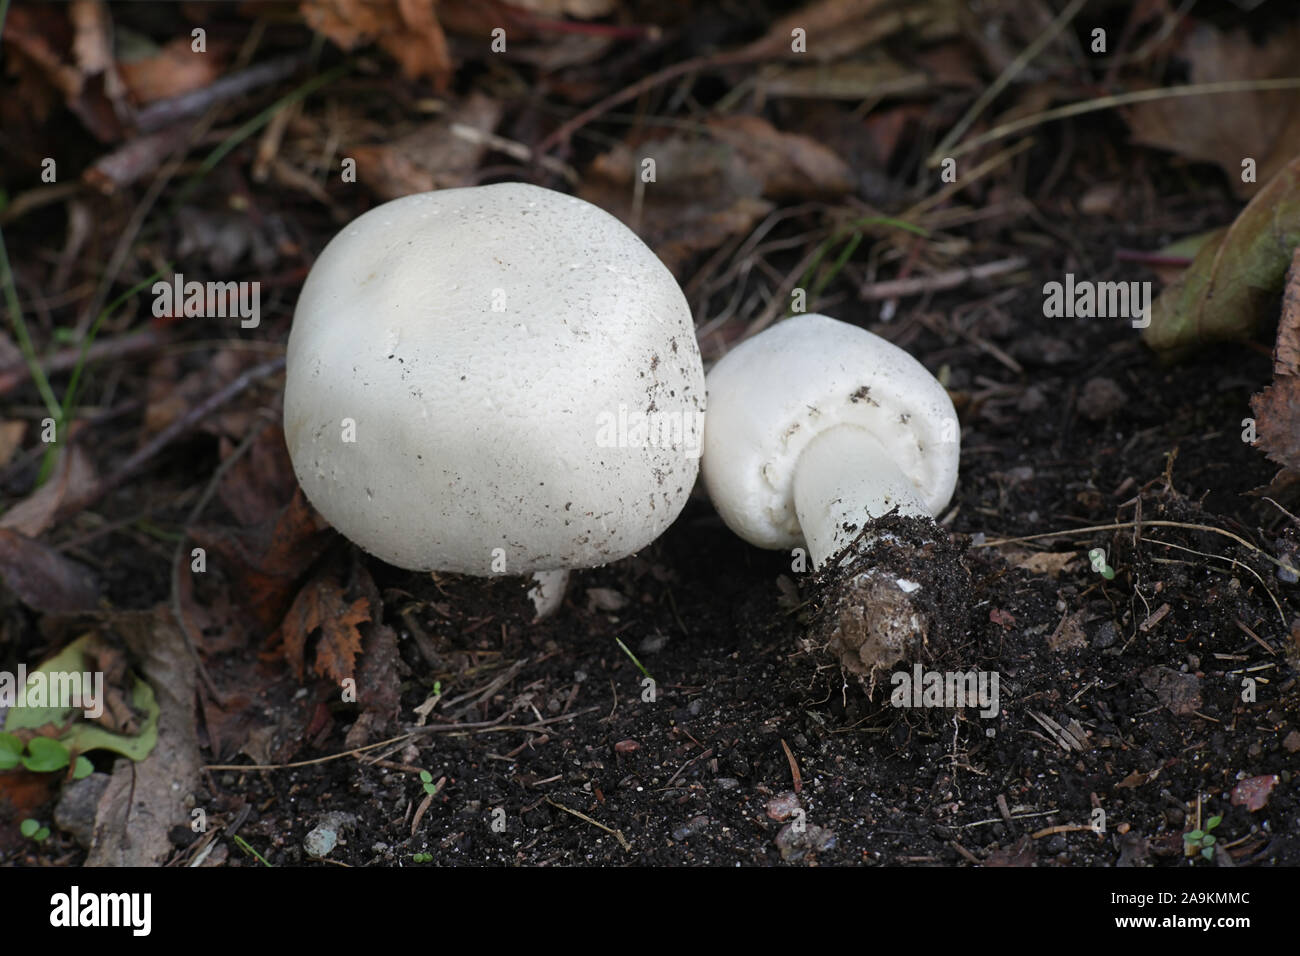 Agaricus arvensis, known as the horse mushroom, wild edible mushroom from Finland Stock Photo